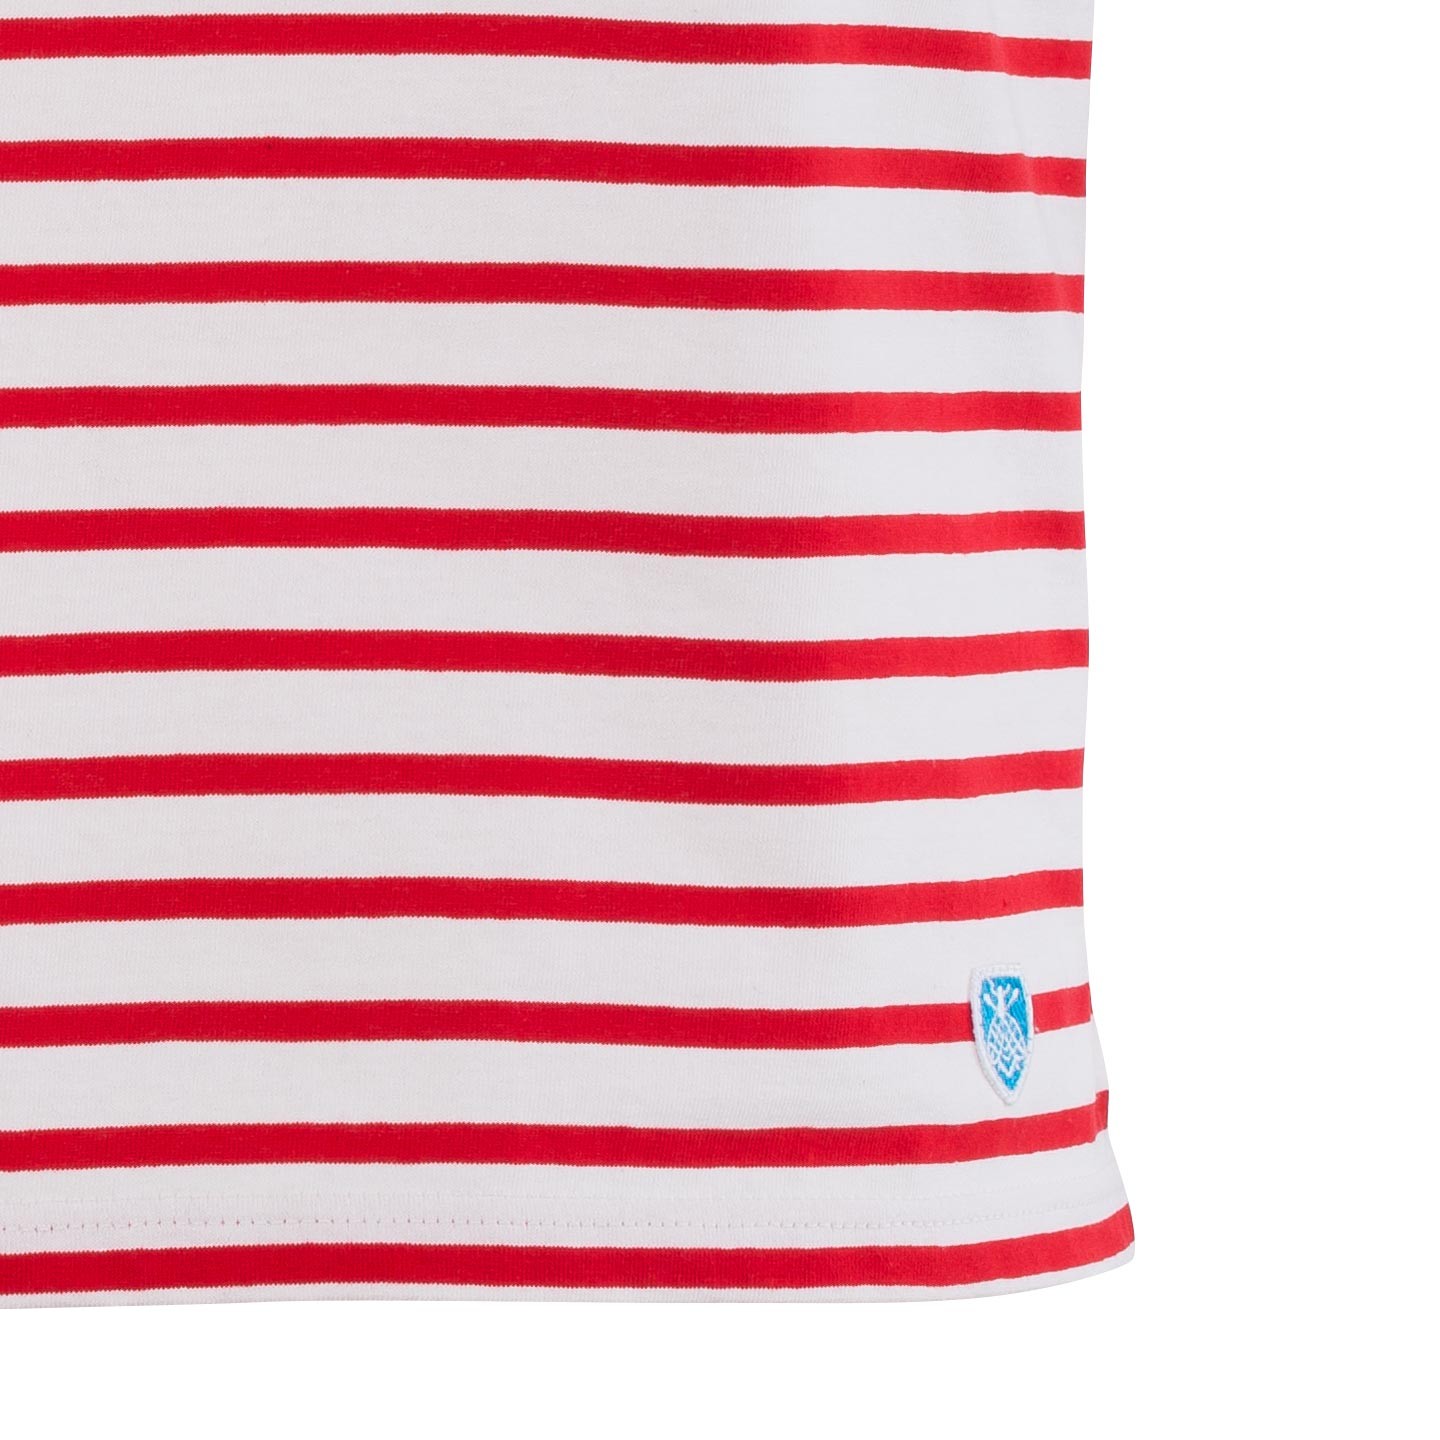 Short striped shirt White / Red, unisex made in France Orcival